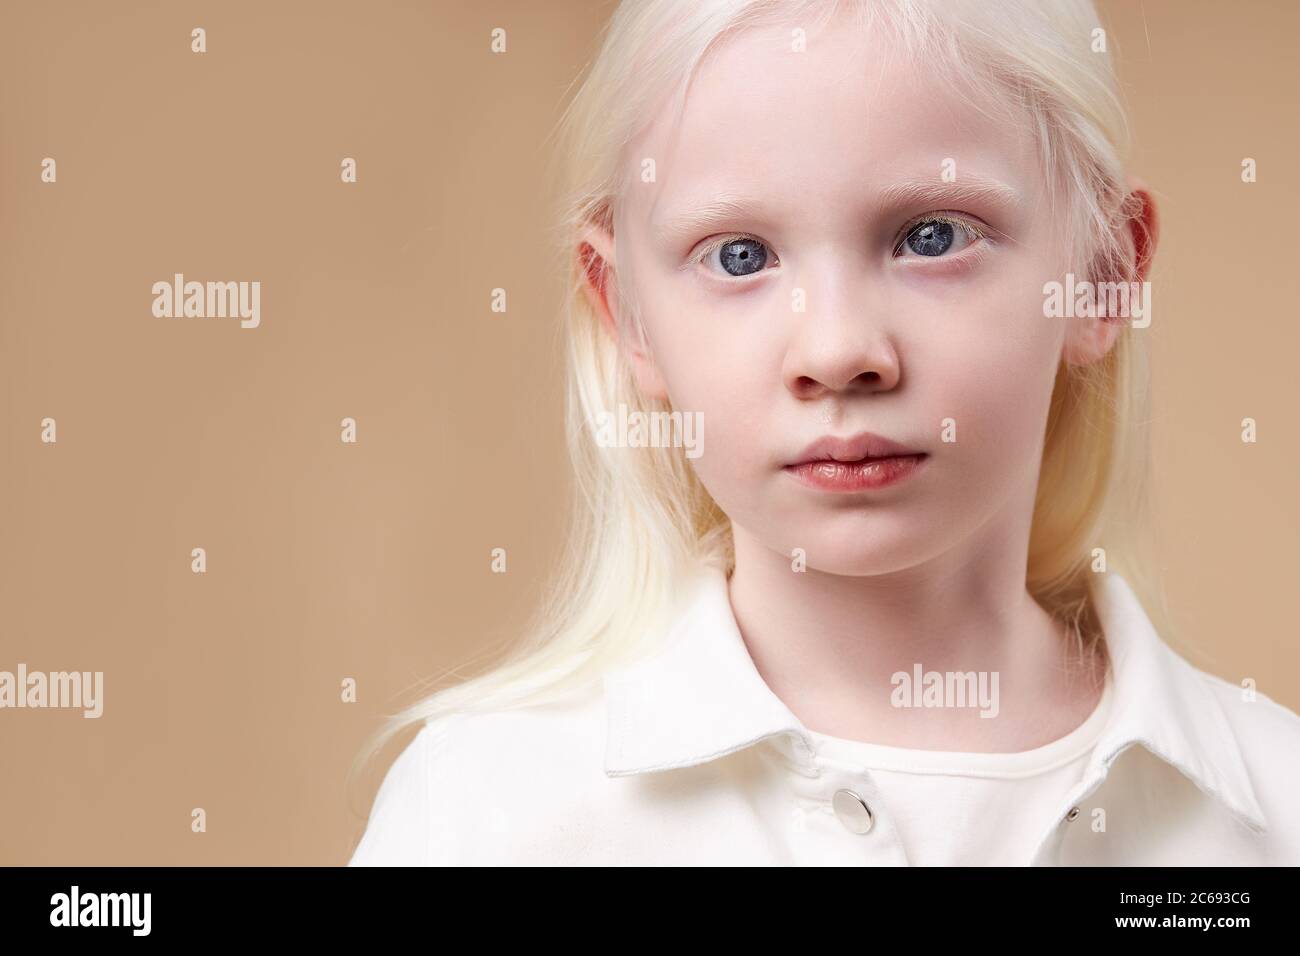 Portrait Of Albino Kid Girl With White Skin And White Hair Blonde Girl With Unusual Natural Beauty Albinism Concept Stock Photo Alamy